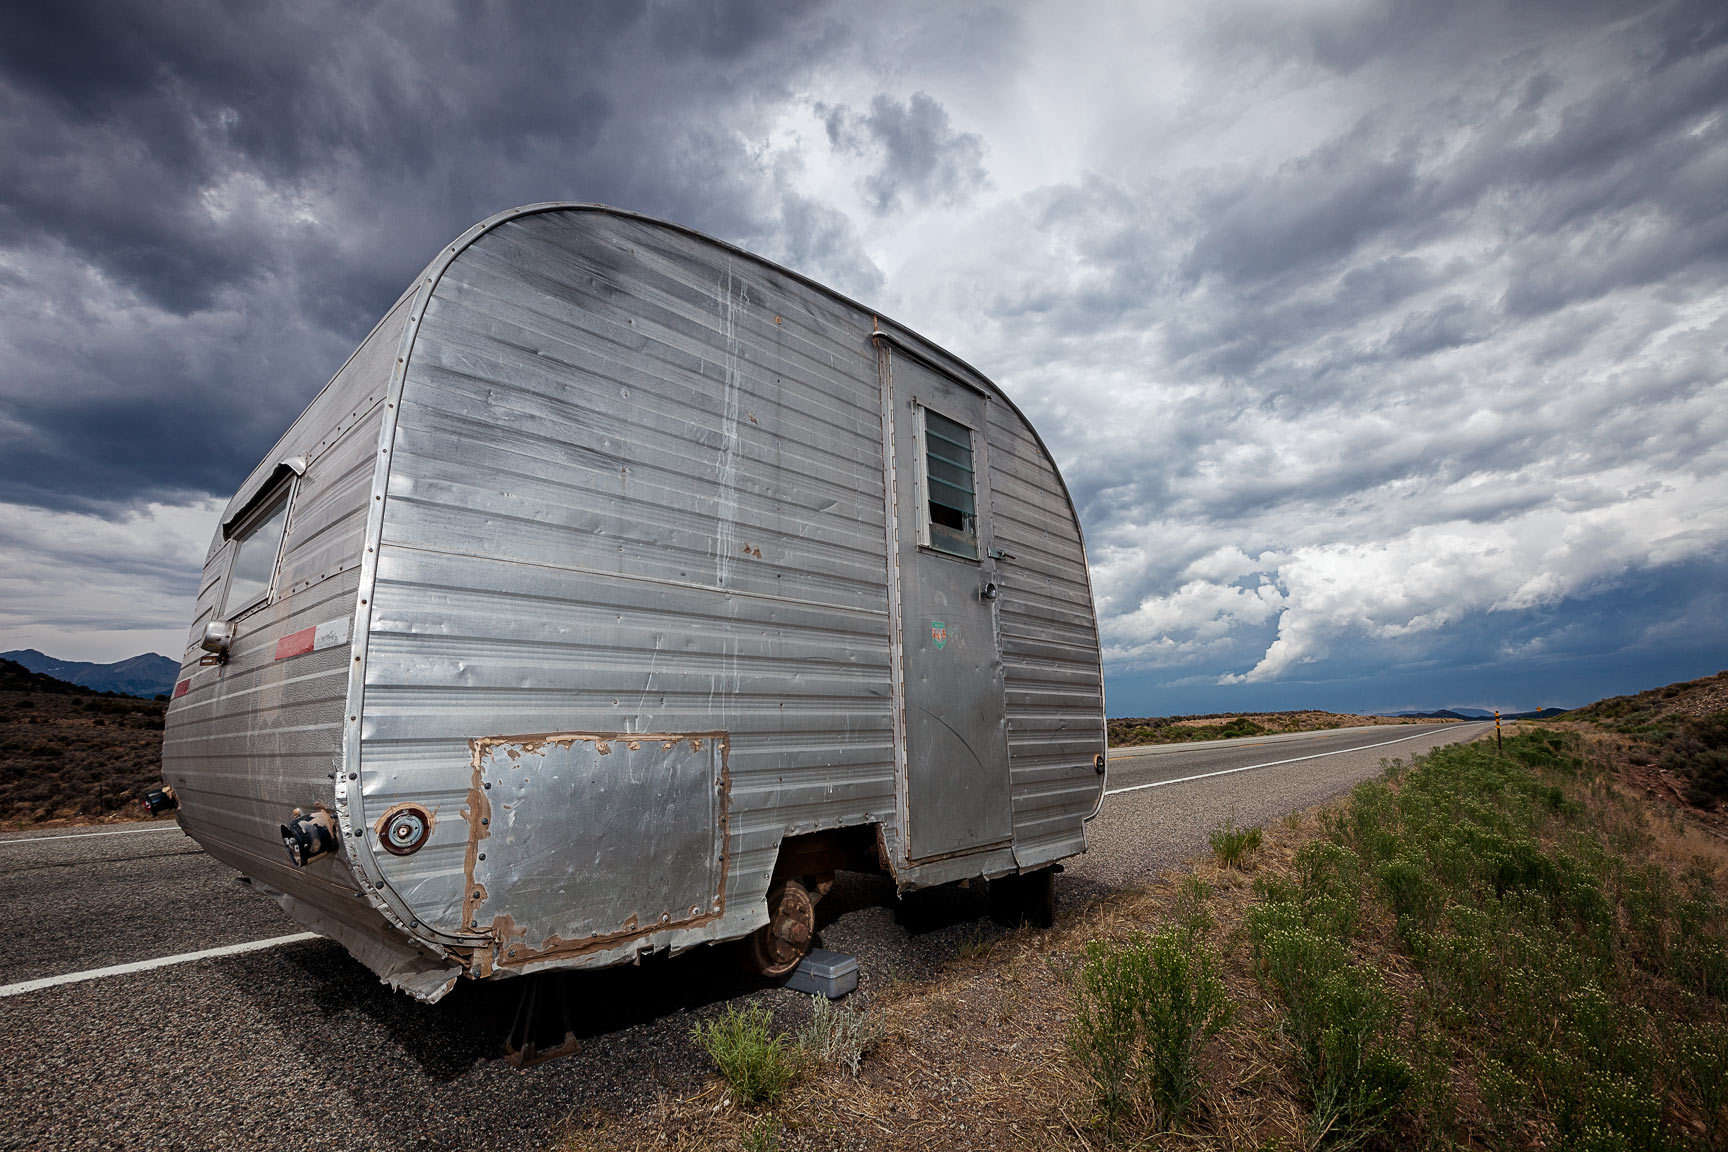 Route 284 in Colorado - a trailer just sitting there abandoned in the middle between there and here. : Visiting Mom : New York City based photographer and video specializing in portrait corporate portraits, video, editorial stories for on location and architectural photography